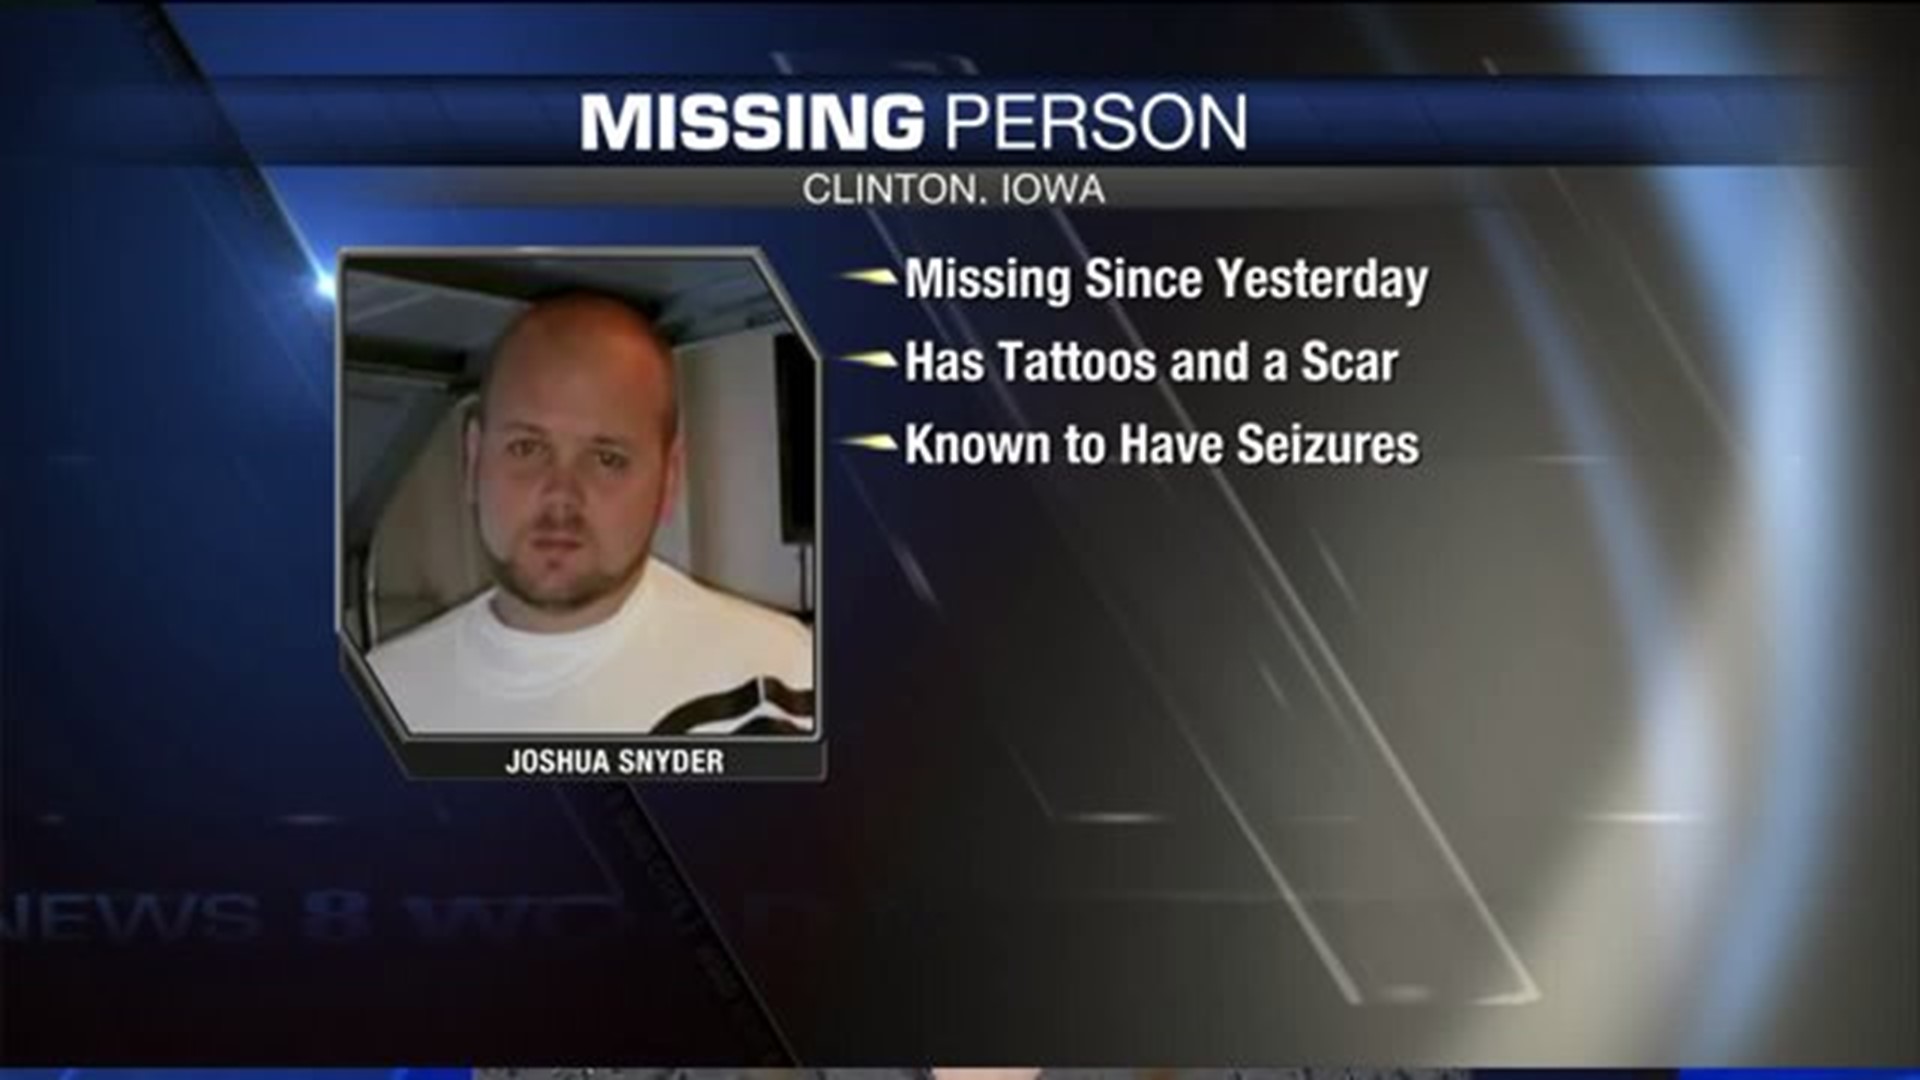 Clinton, Iowa man reported missing